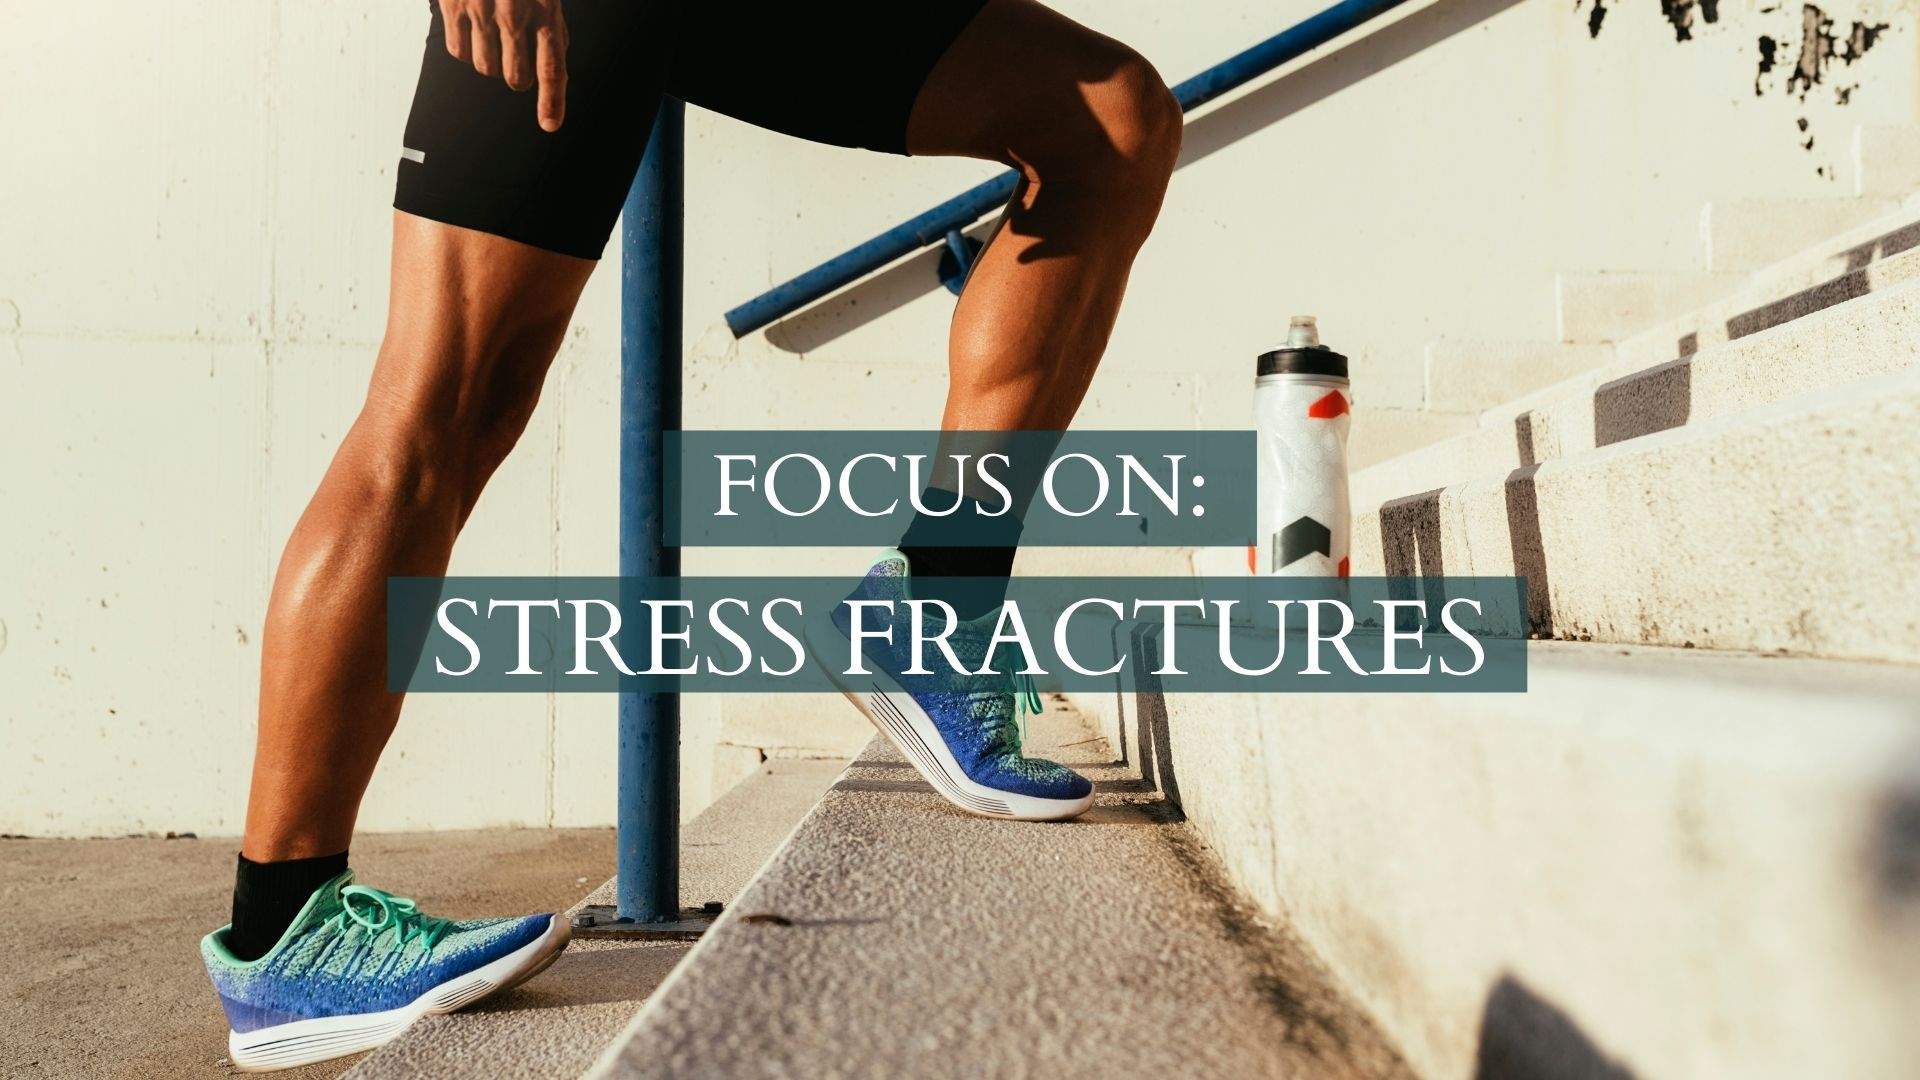 Focus On: Stress Fractures